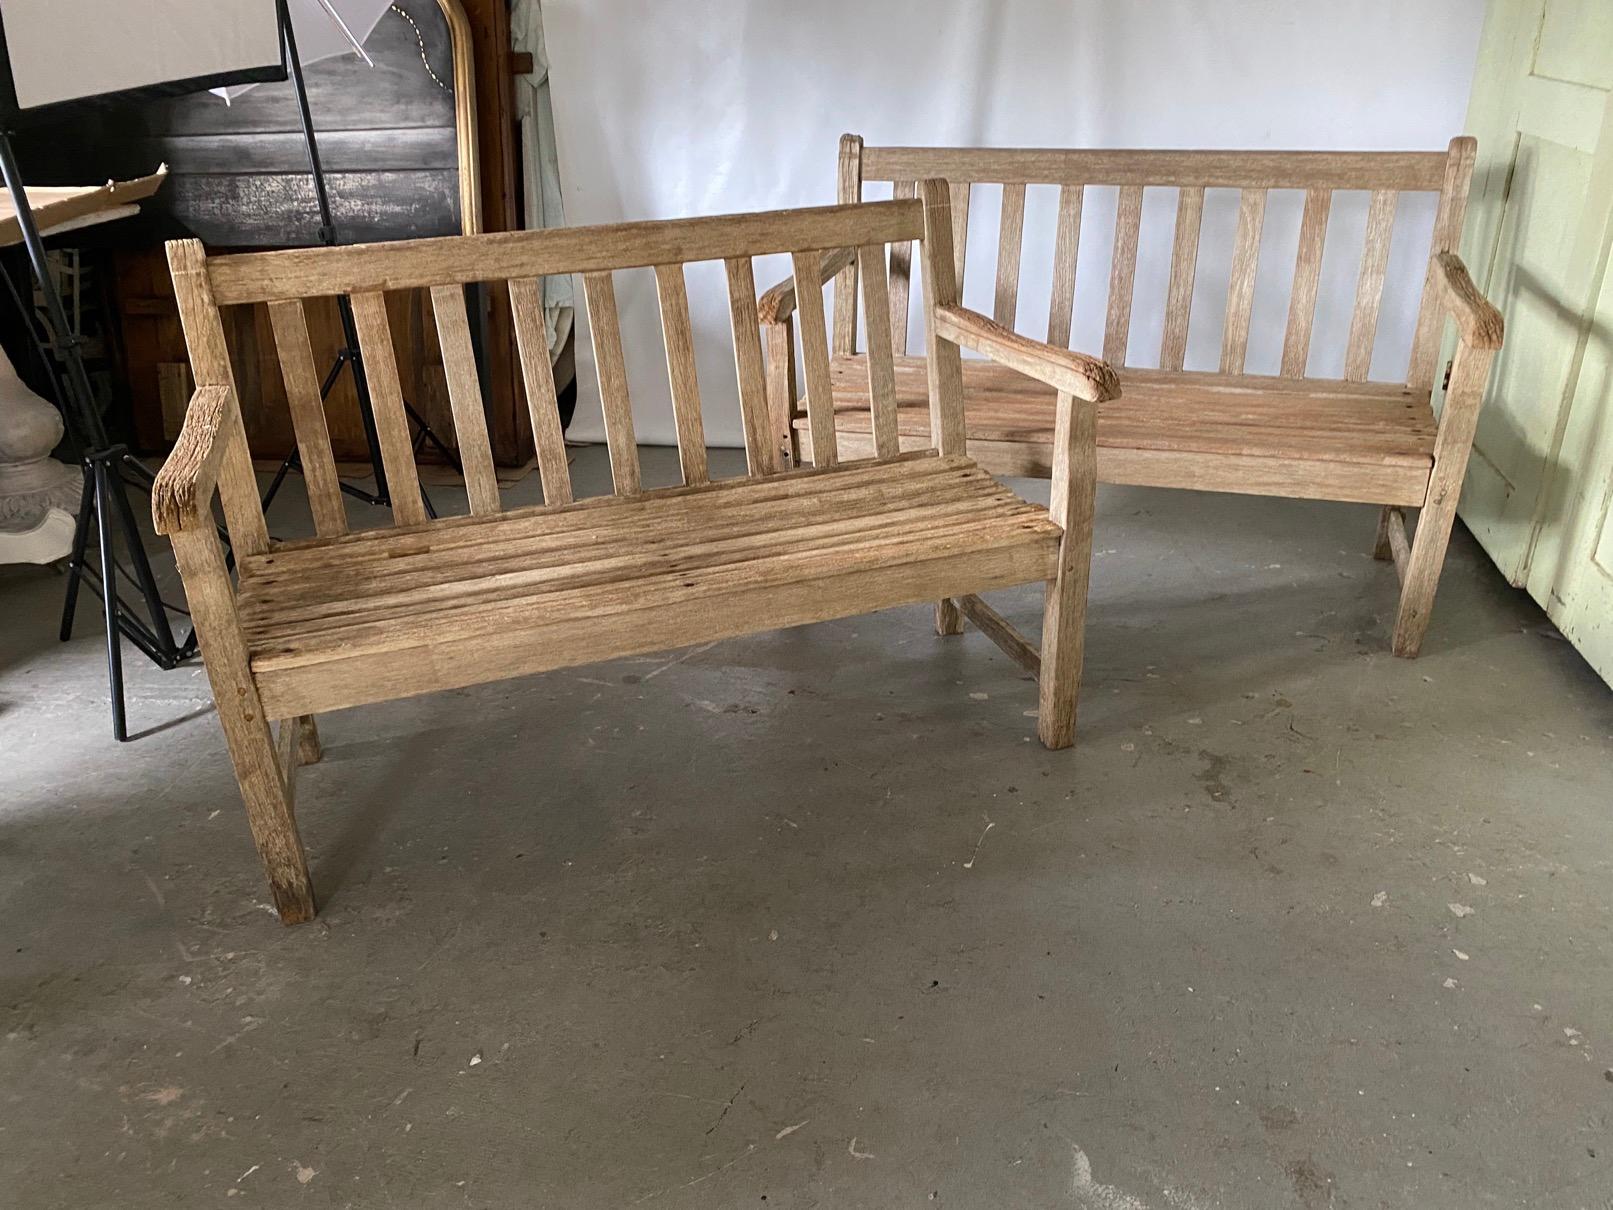 Classic styling, vintage two-seat teak bench with arms has wonderful weathered patina. Wonderful for the patio, porch or garden.